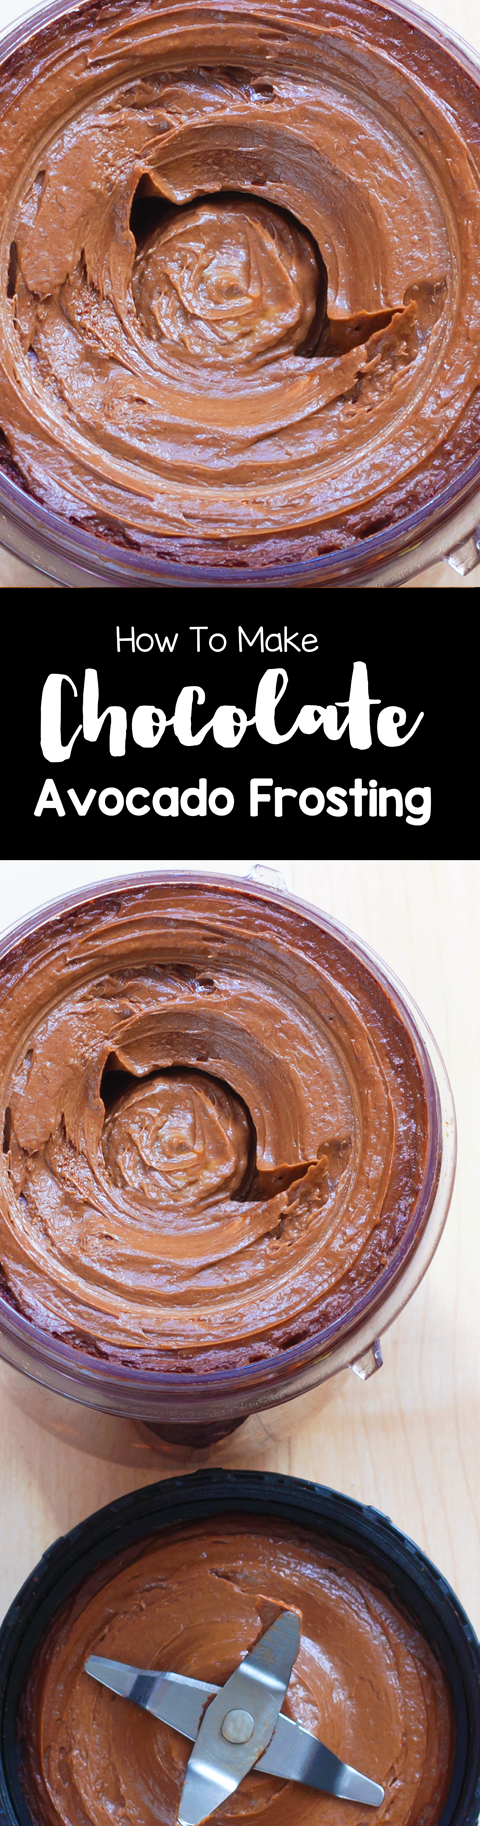 How To Make Chocolate Frosting, With Avocado Instead Of Shortening Or Butter